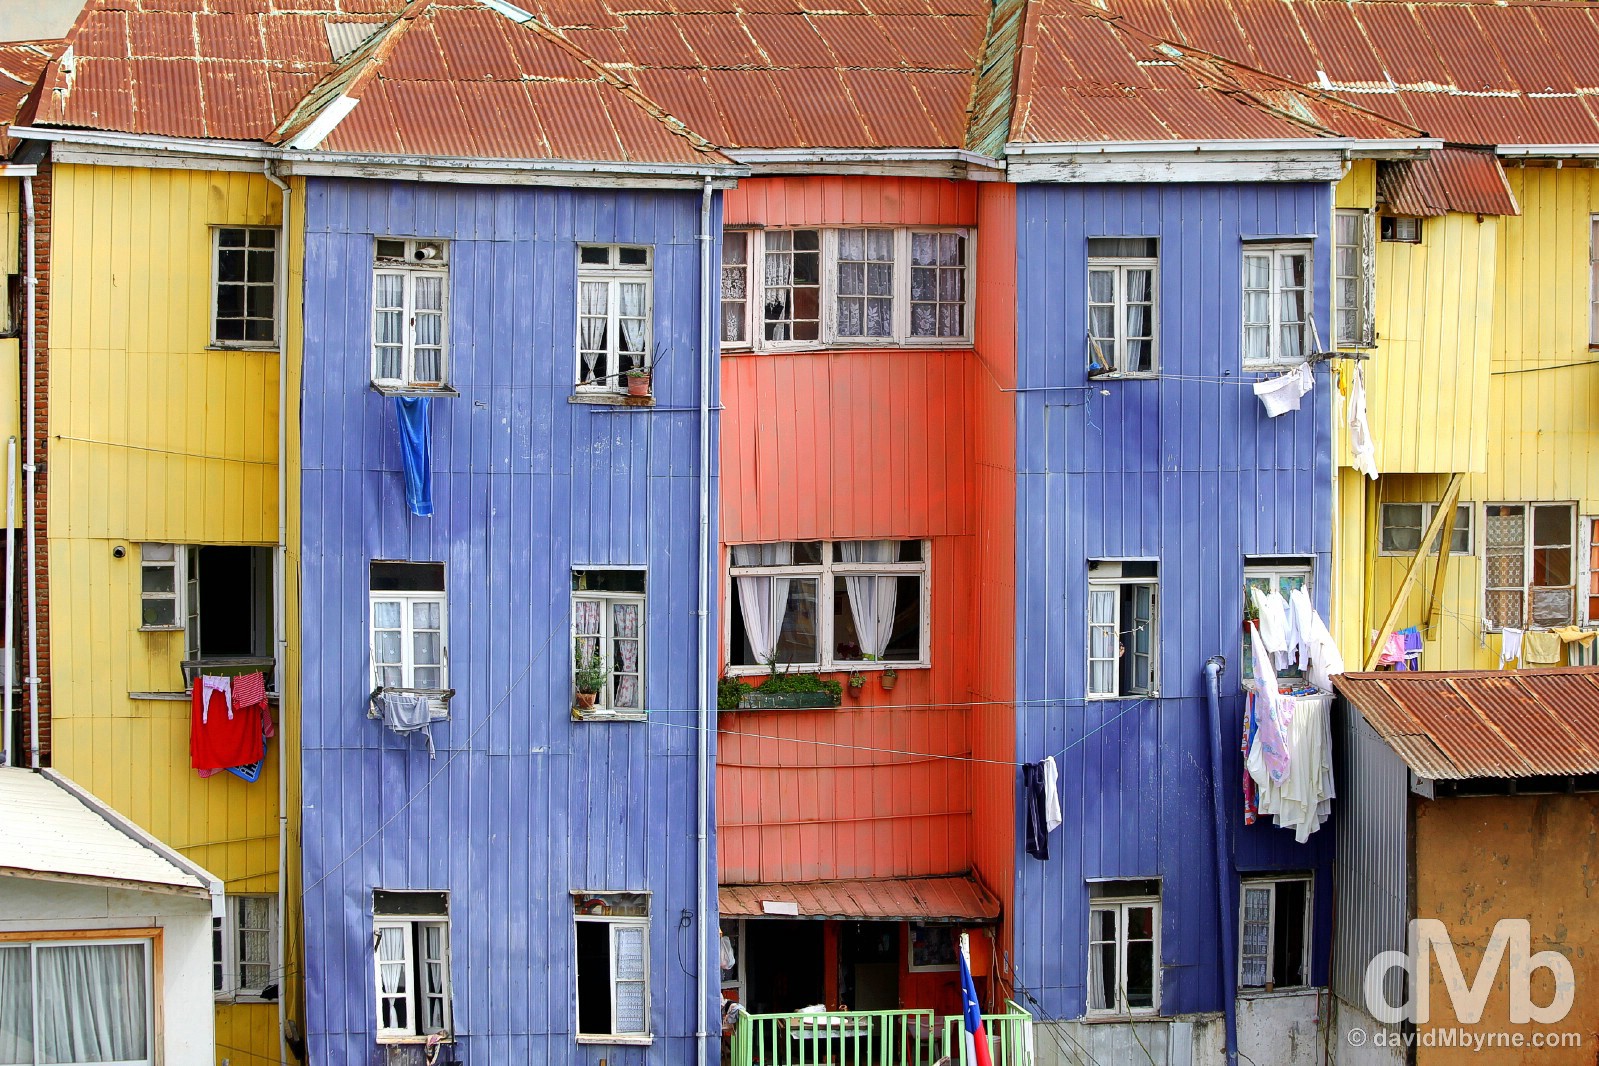 A row of corrugated iron buildings in the Bellavista district of Valparaiso, Chile. October 8, 2015. 